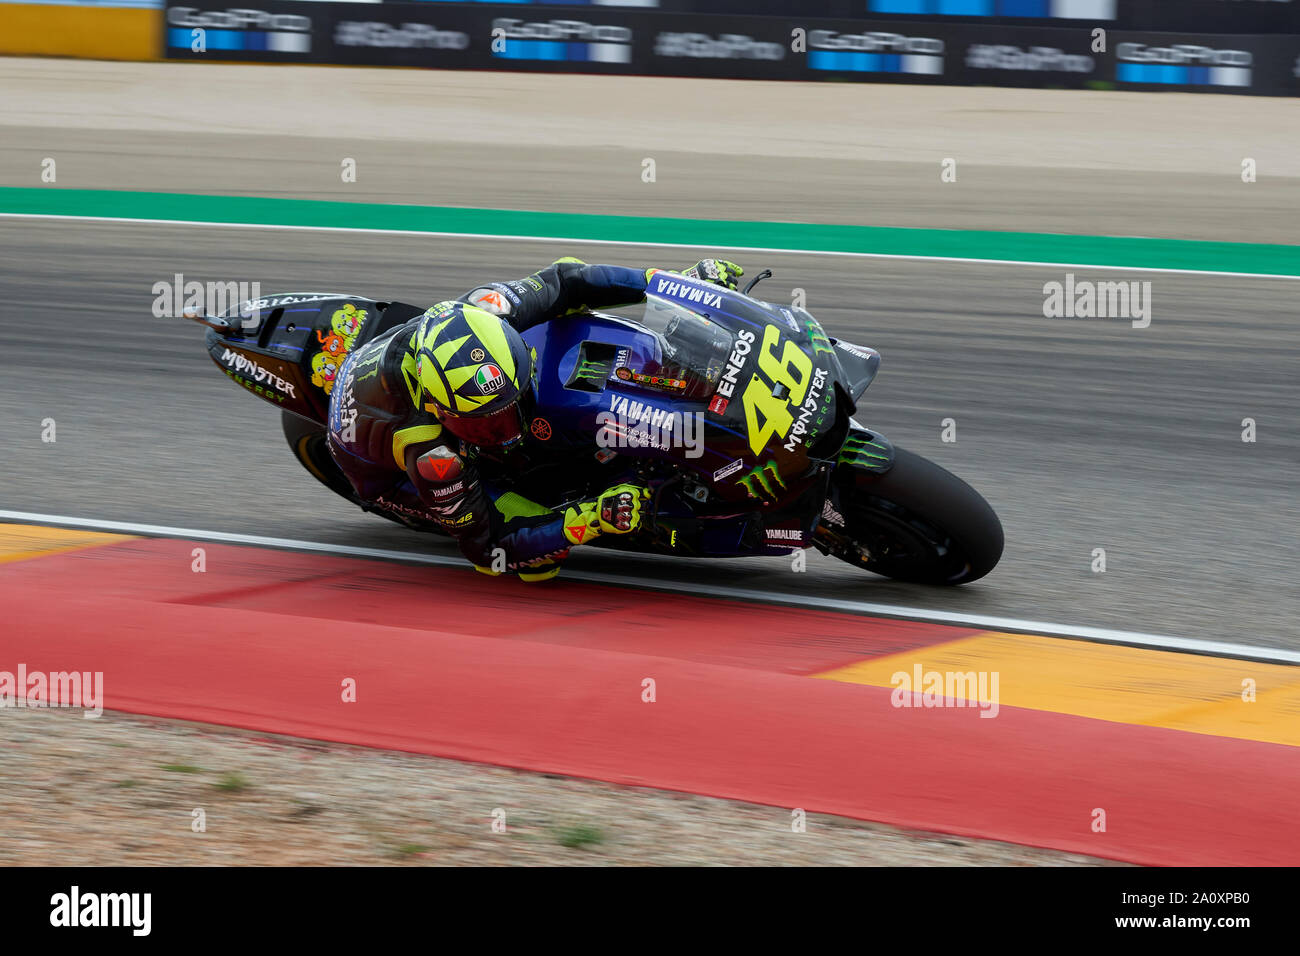 22nd September 2019; Ciudad del Motor de Aragon, Alcaniz, Spain; Aragon Motorcycle Grand Prix, Race Day; Valentino Rossi of the Monster Energy Yamaha Team rounds the bend during the Aragon GP Stock Photo